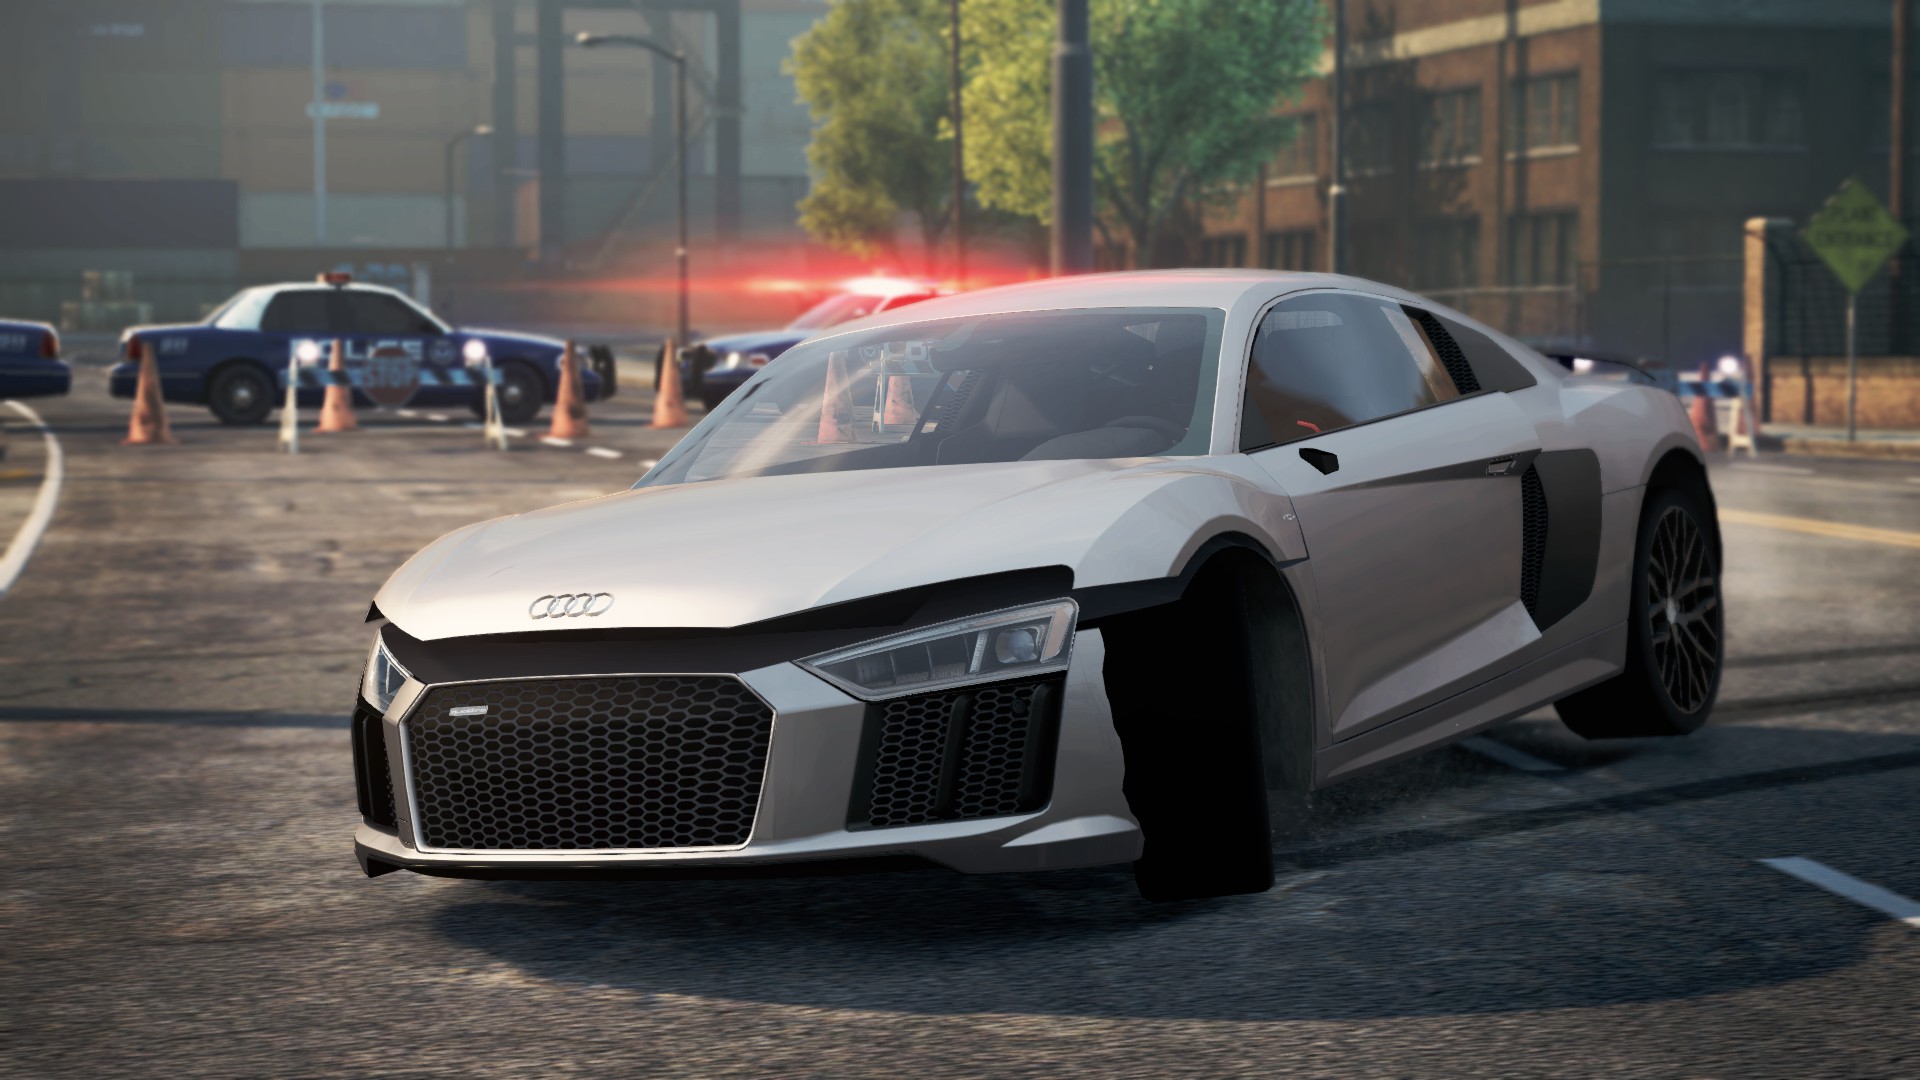 Audi R8 V10 Plus [Add-On / Replace] 